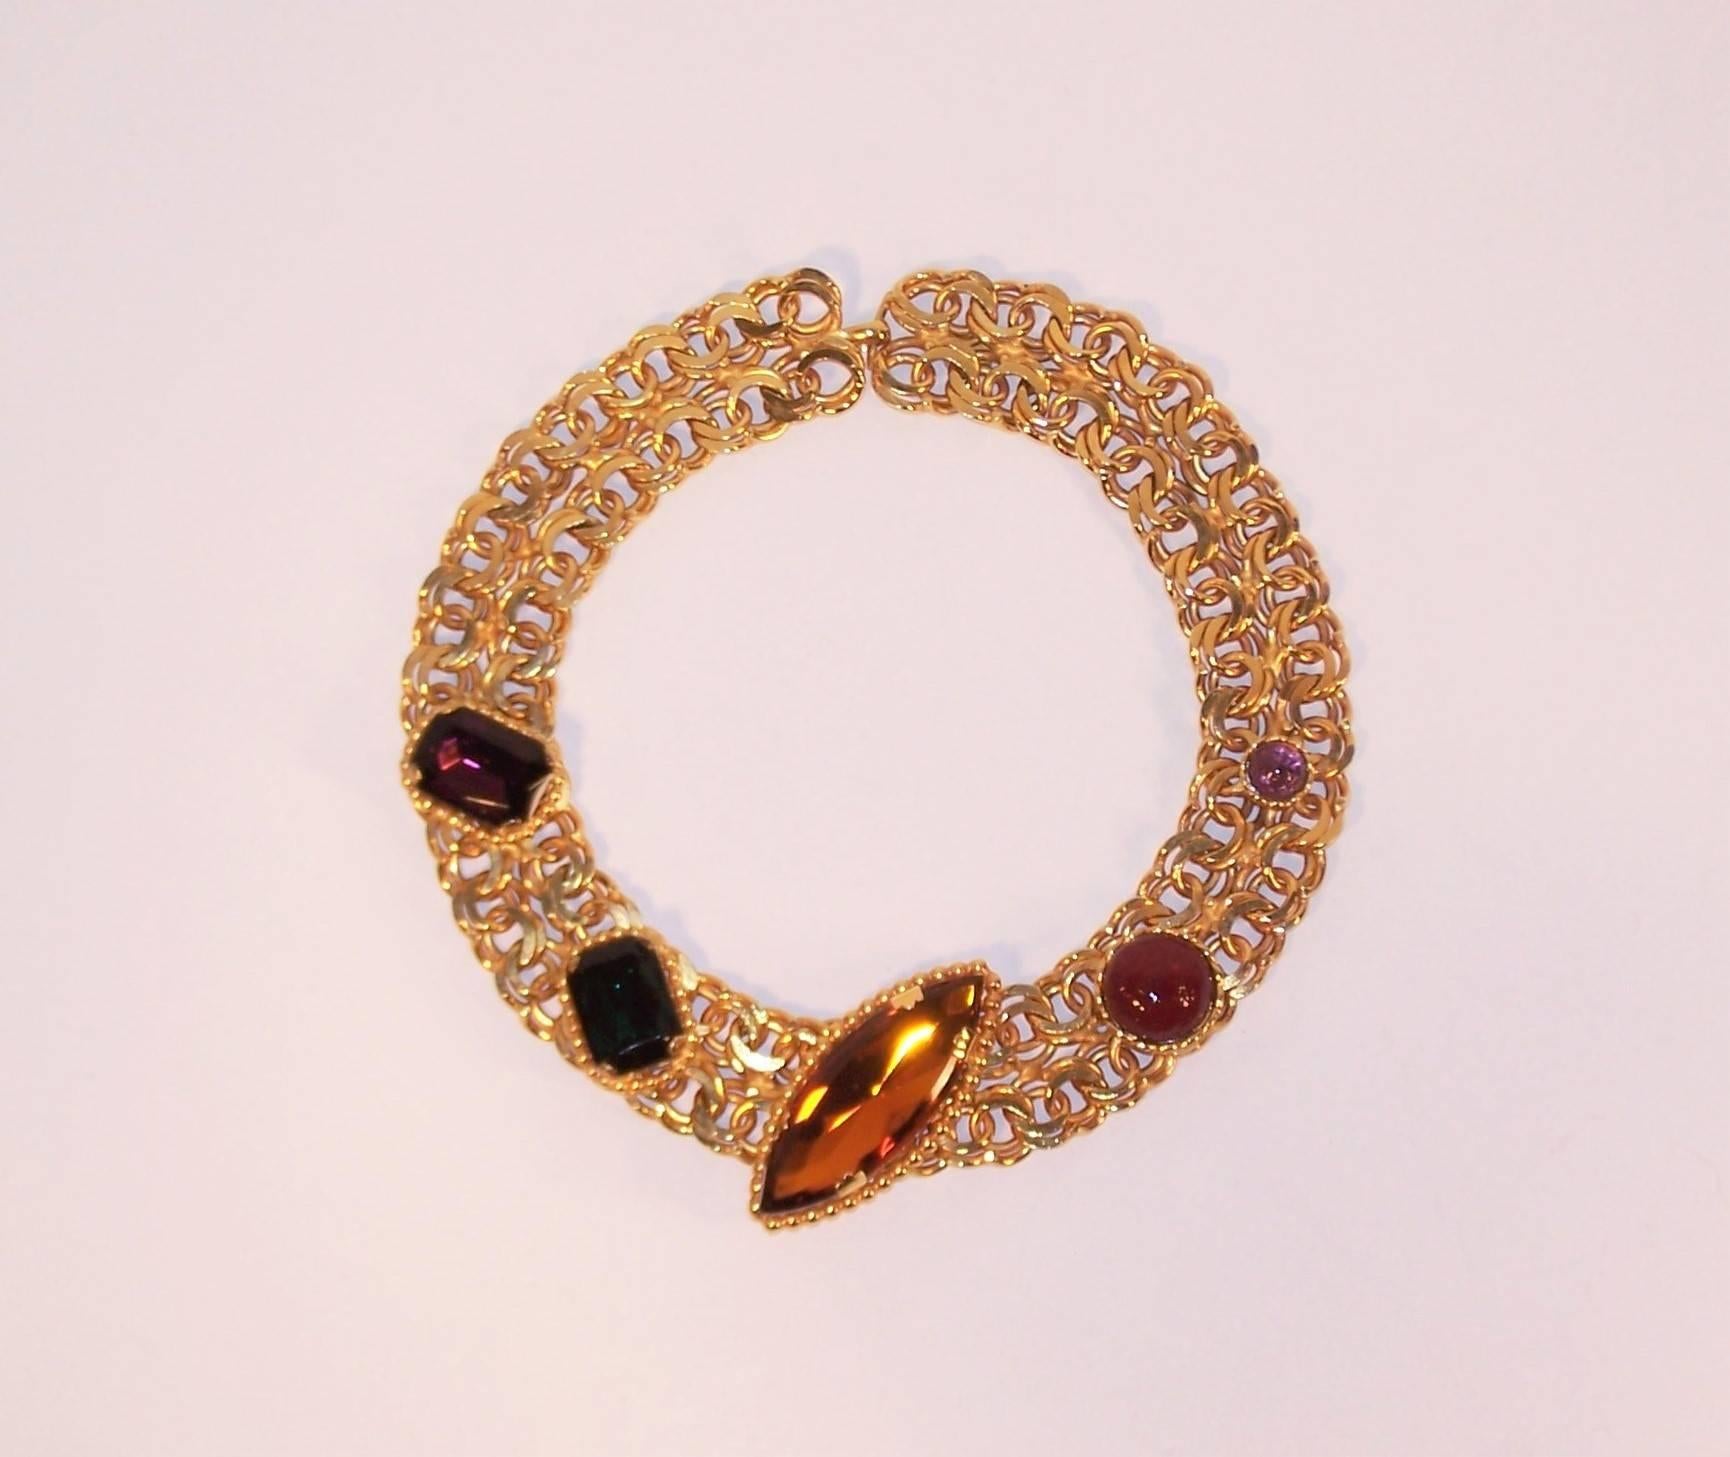 This Dominique Aurientis collar necklace is a stunning statement maker.  Heavy gold tone linked chain serves as a support to giant faceted rhinestones and Gripoix glass framed in both gold beading and twisted casings.  The rich colors of amethyst